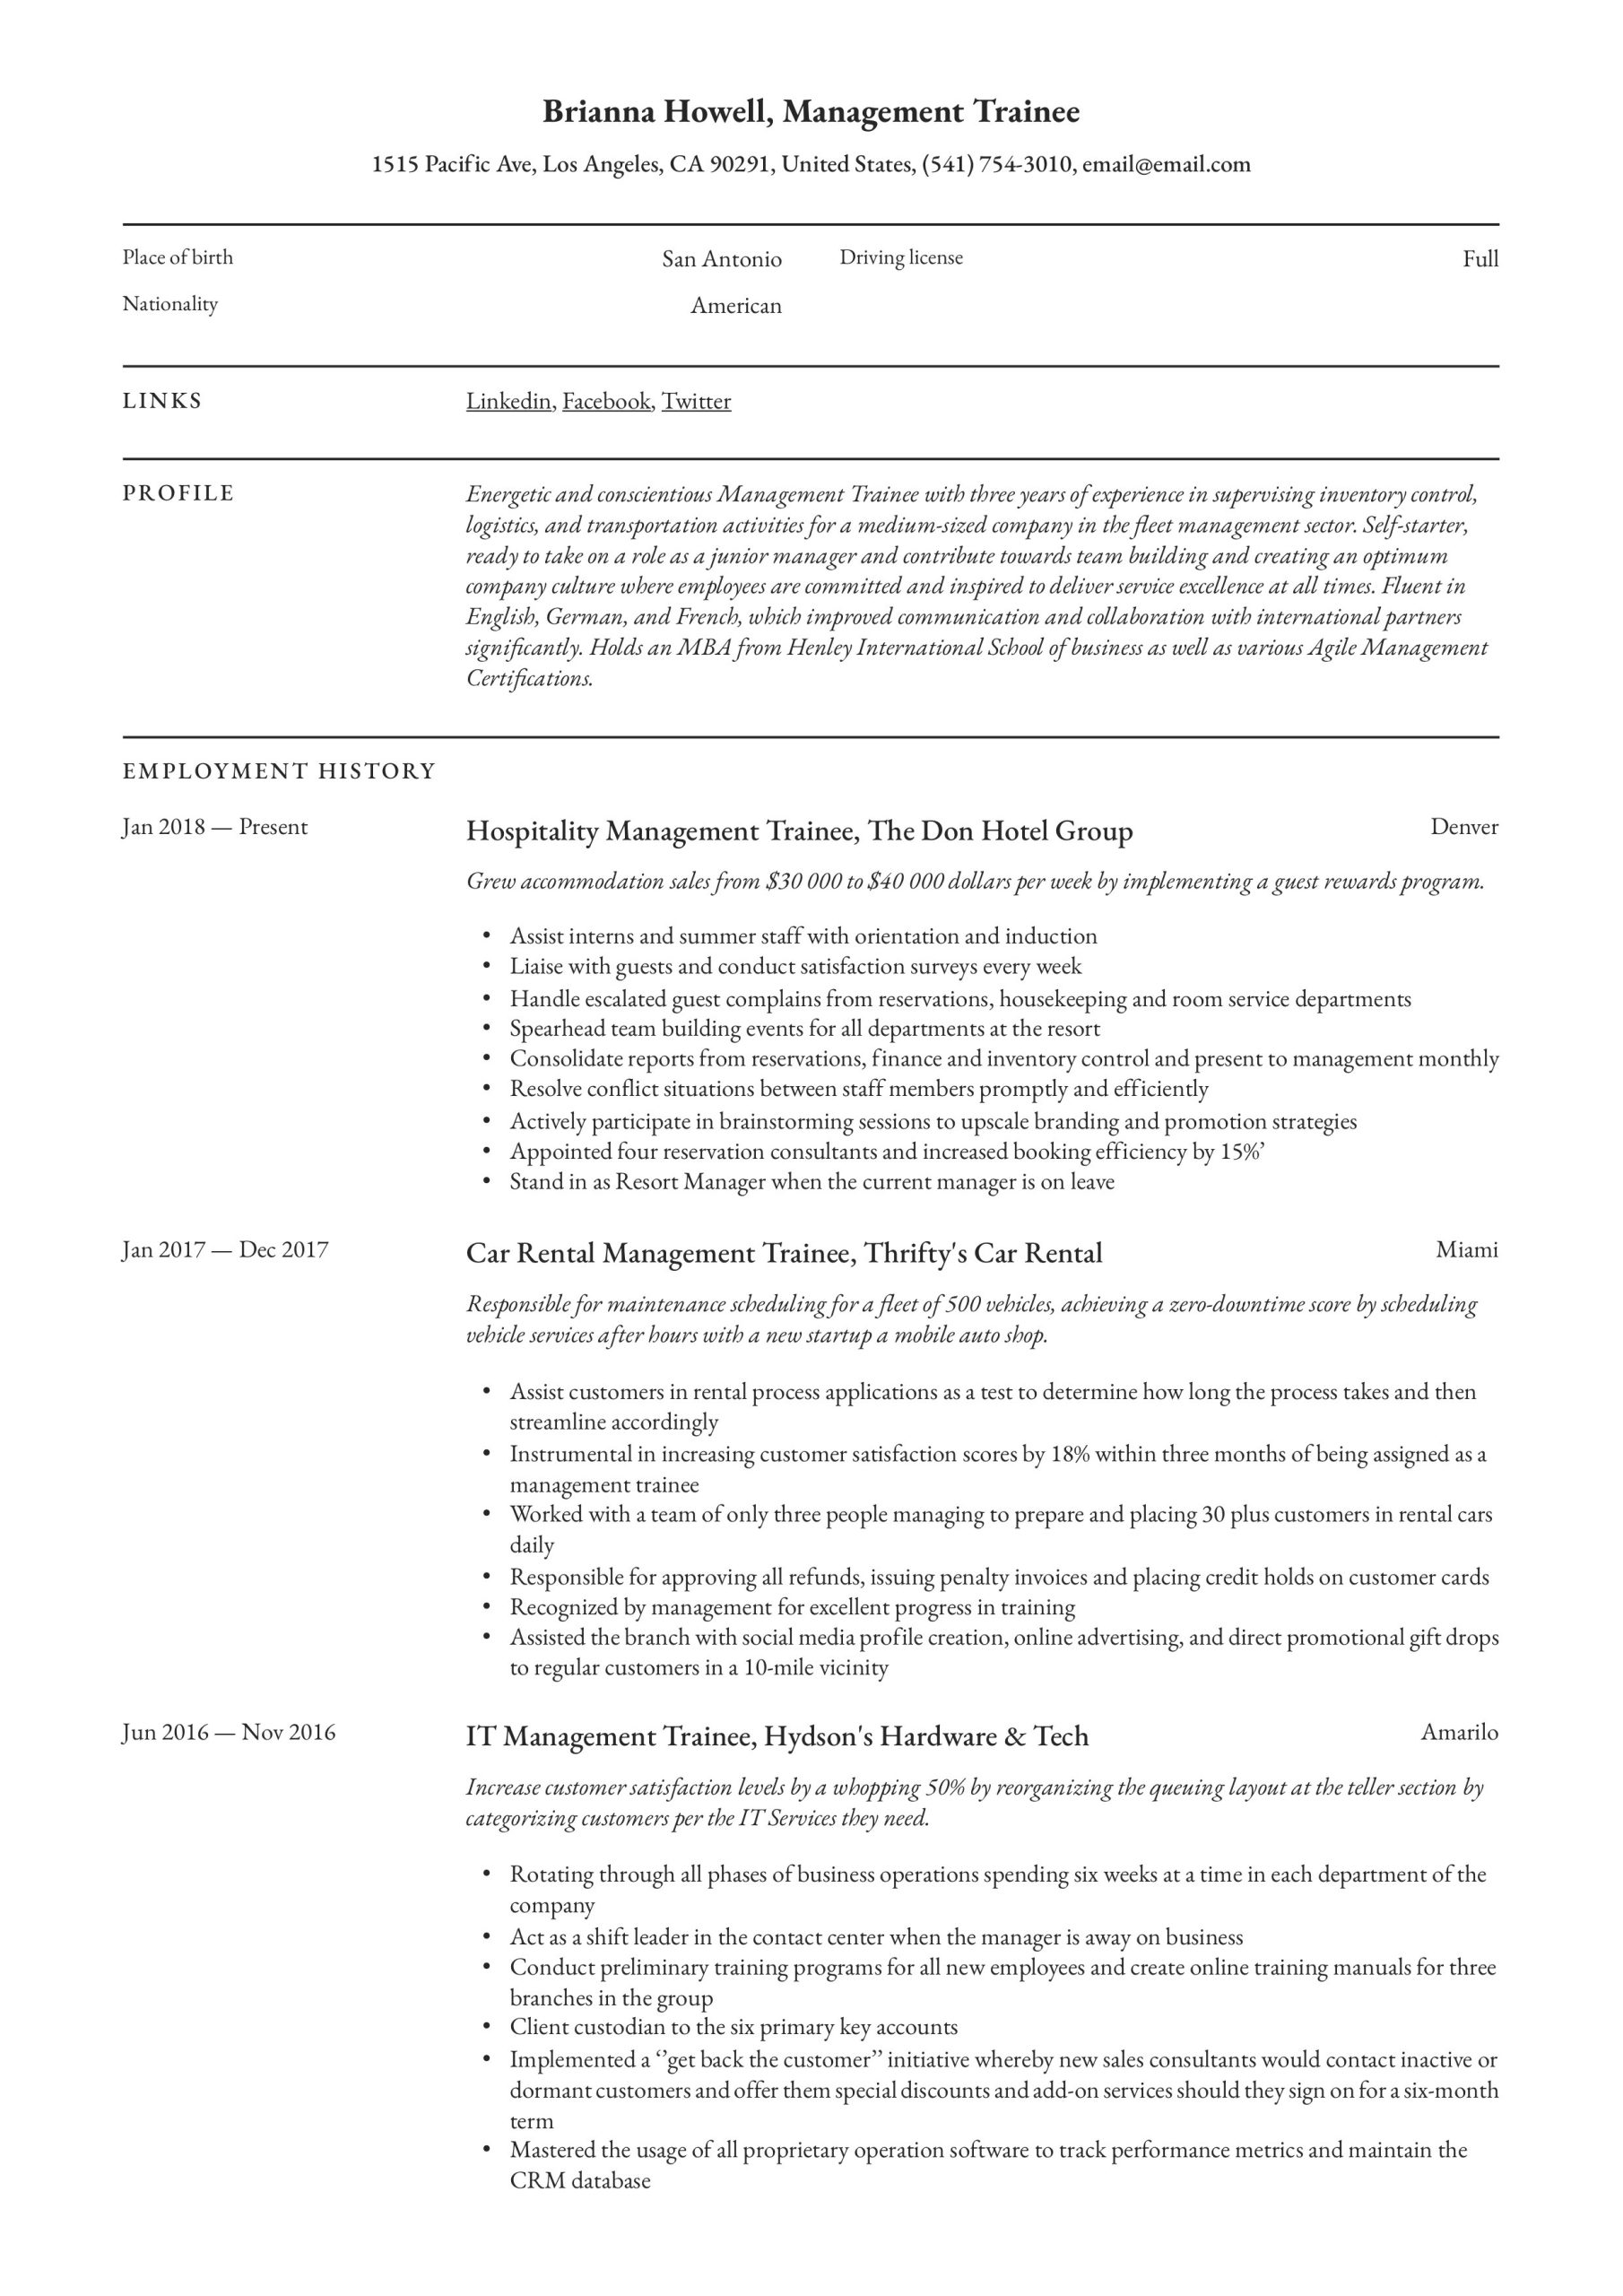 Sample Resume for Fresh Graduates Of tourism Management Management Resume & Writing Guide  12 Examples 2020